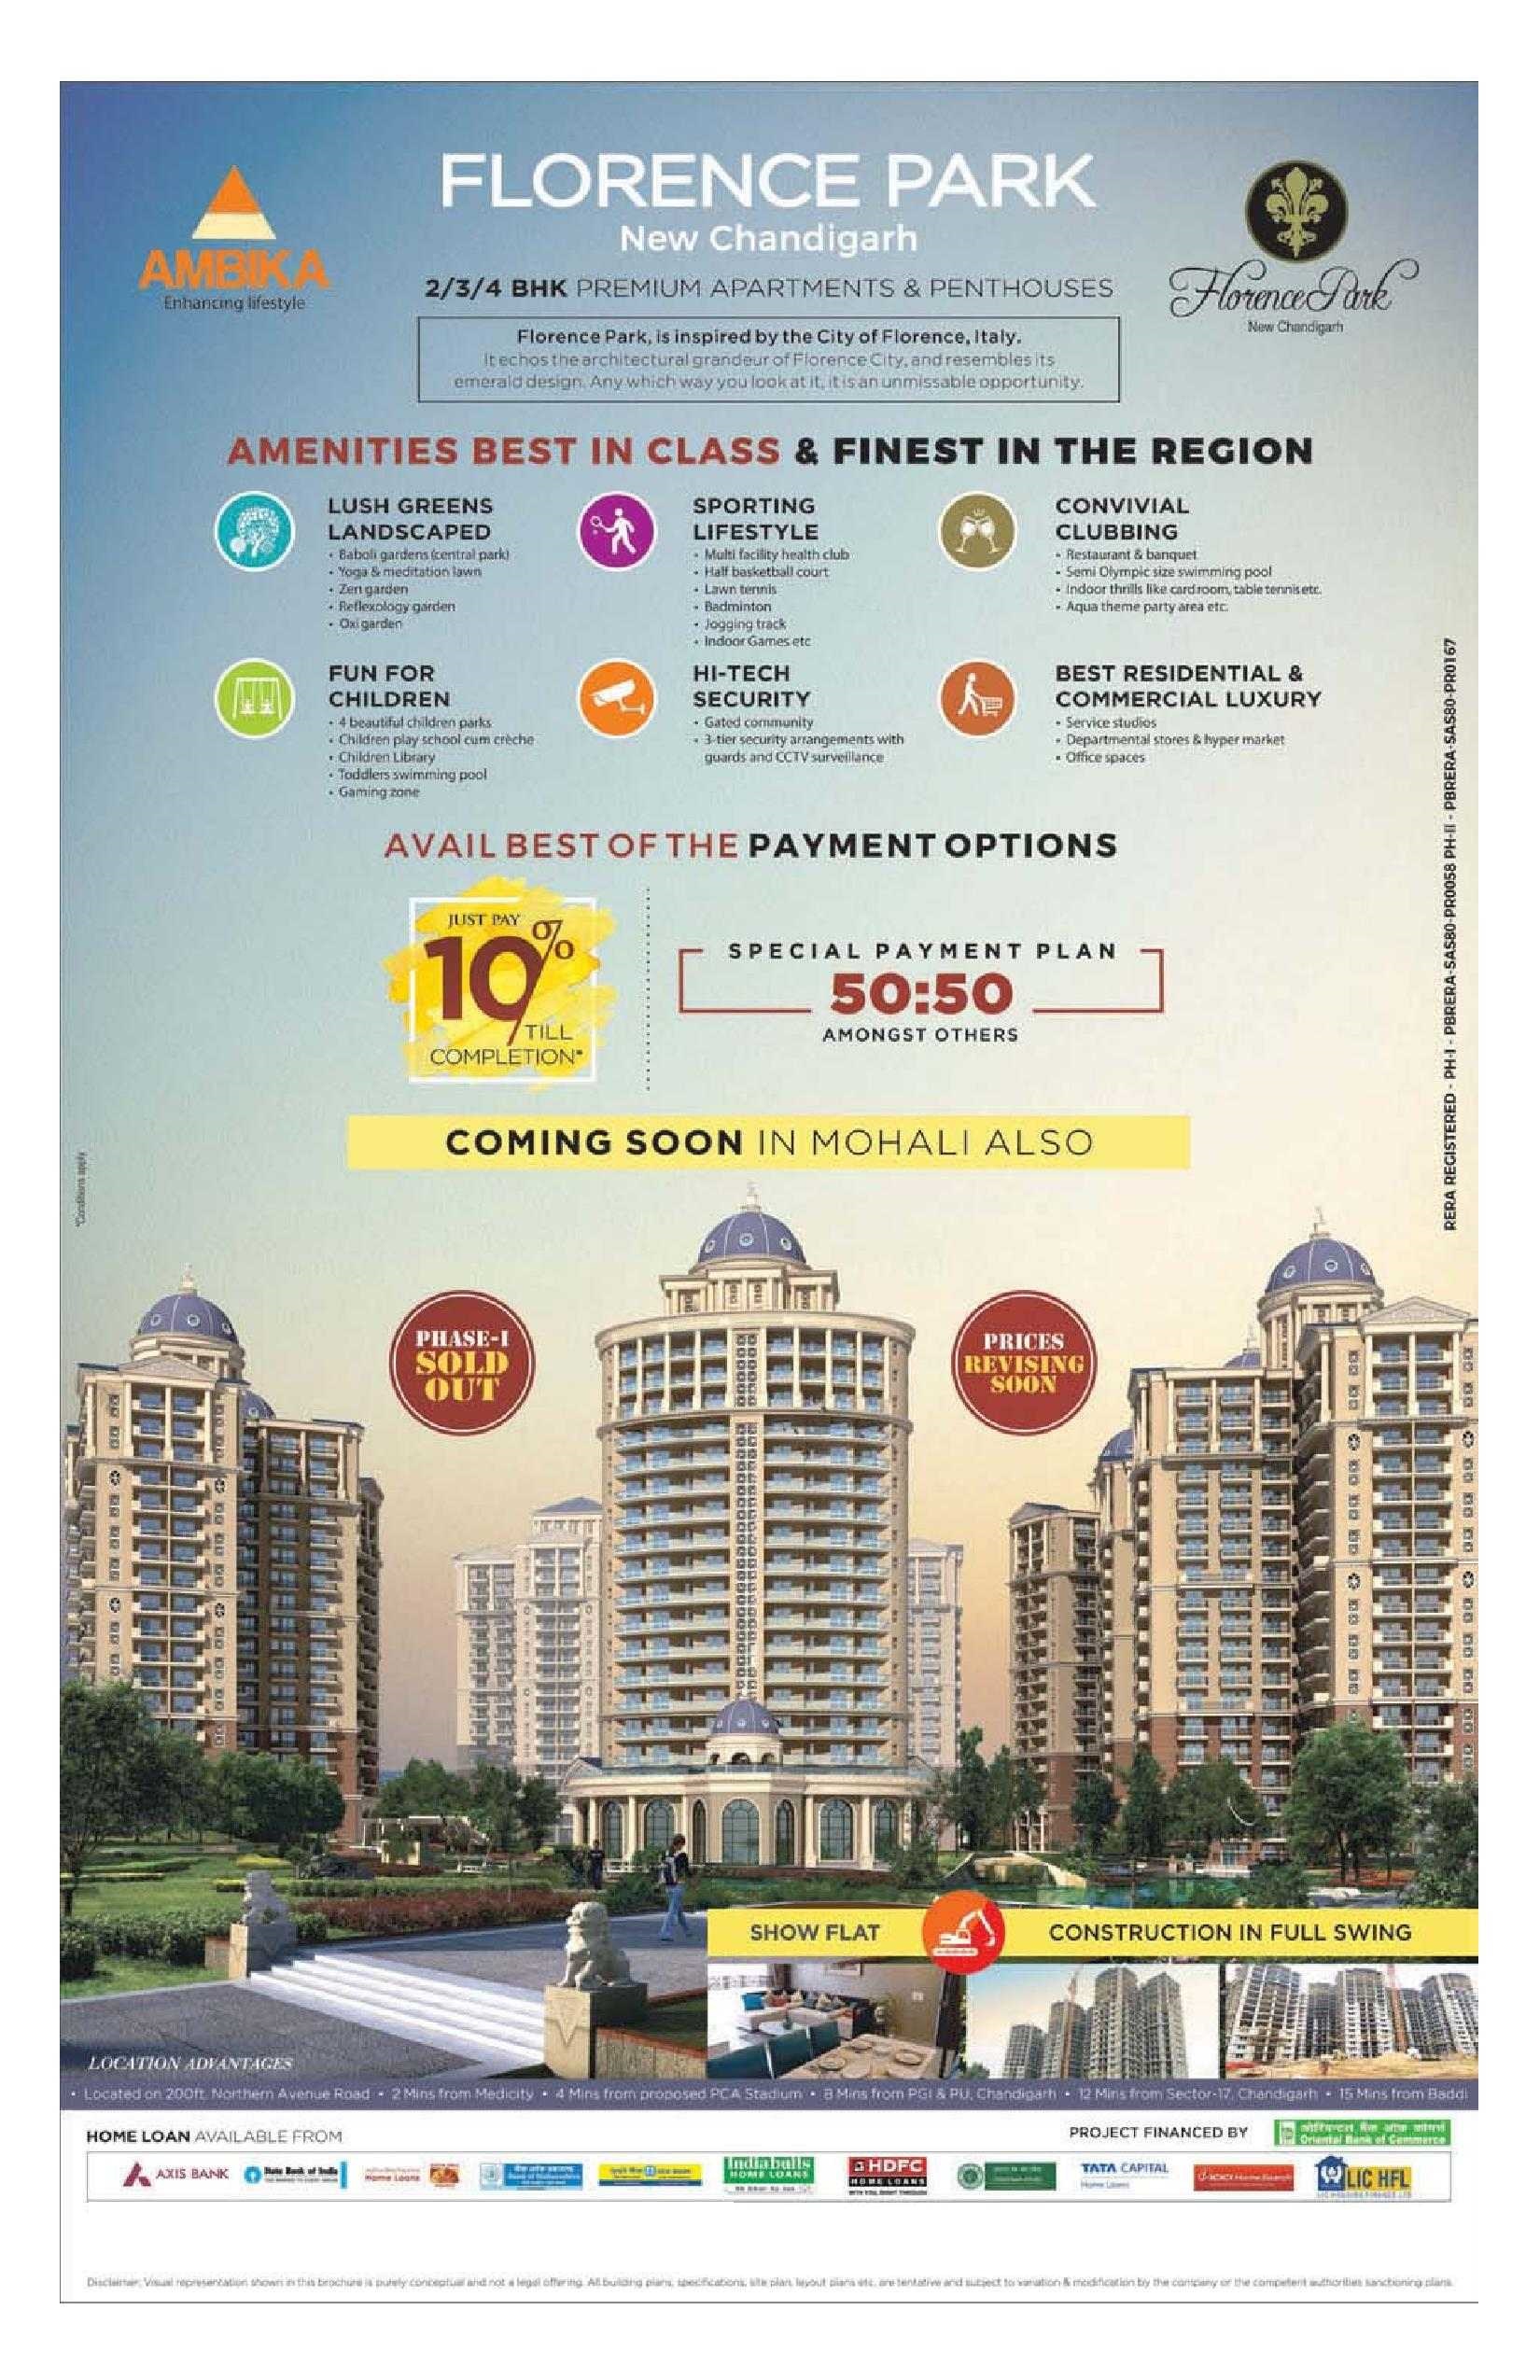 Avail special payment plan of 50:50 at Ambika Florence Park in Chandigarh Update